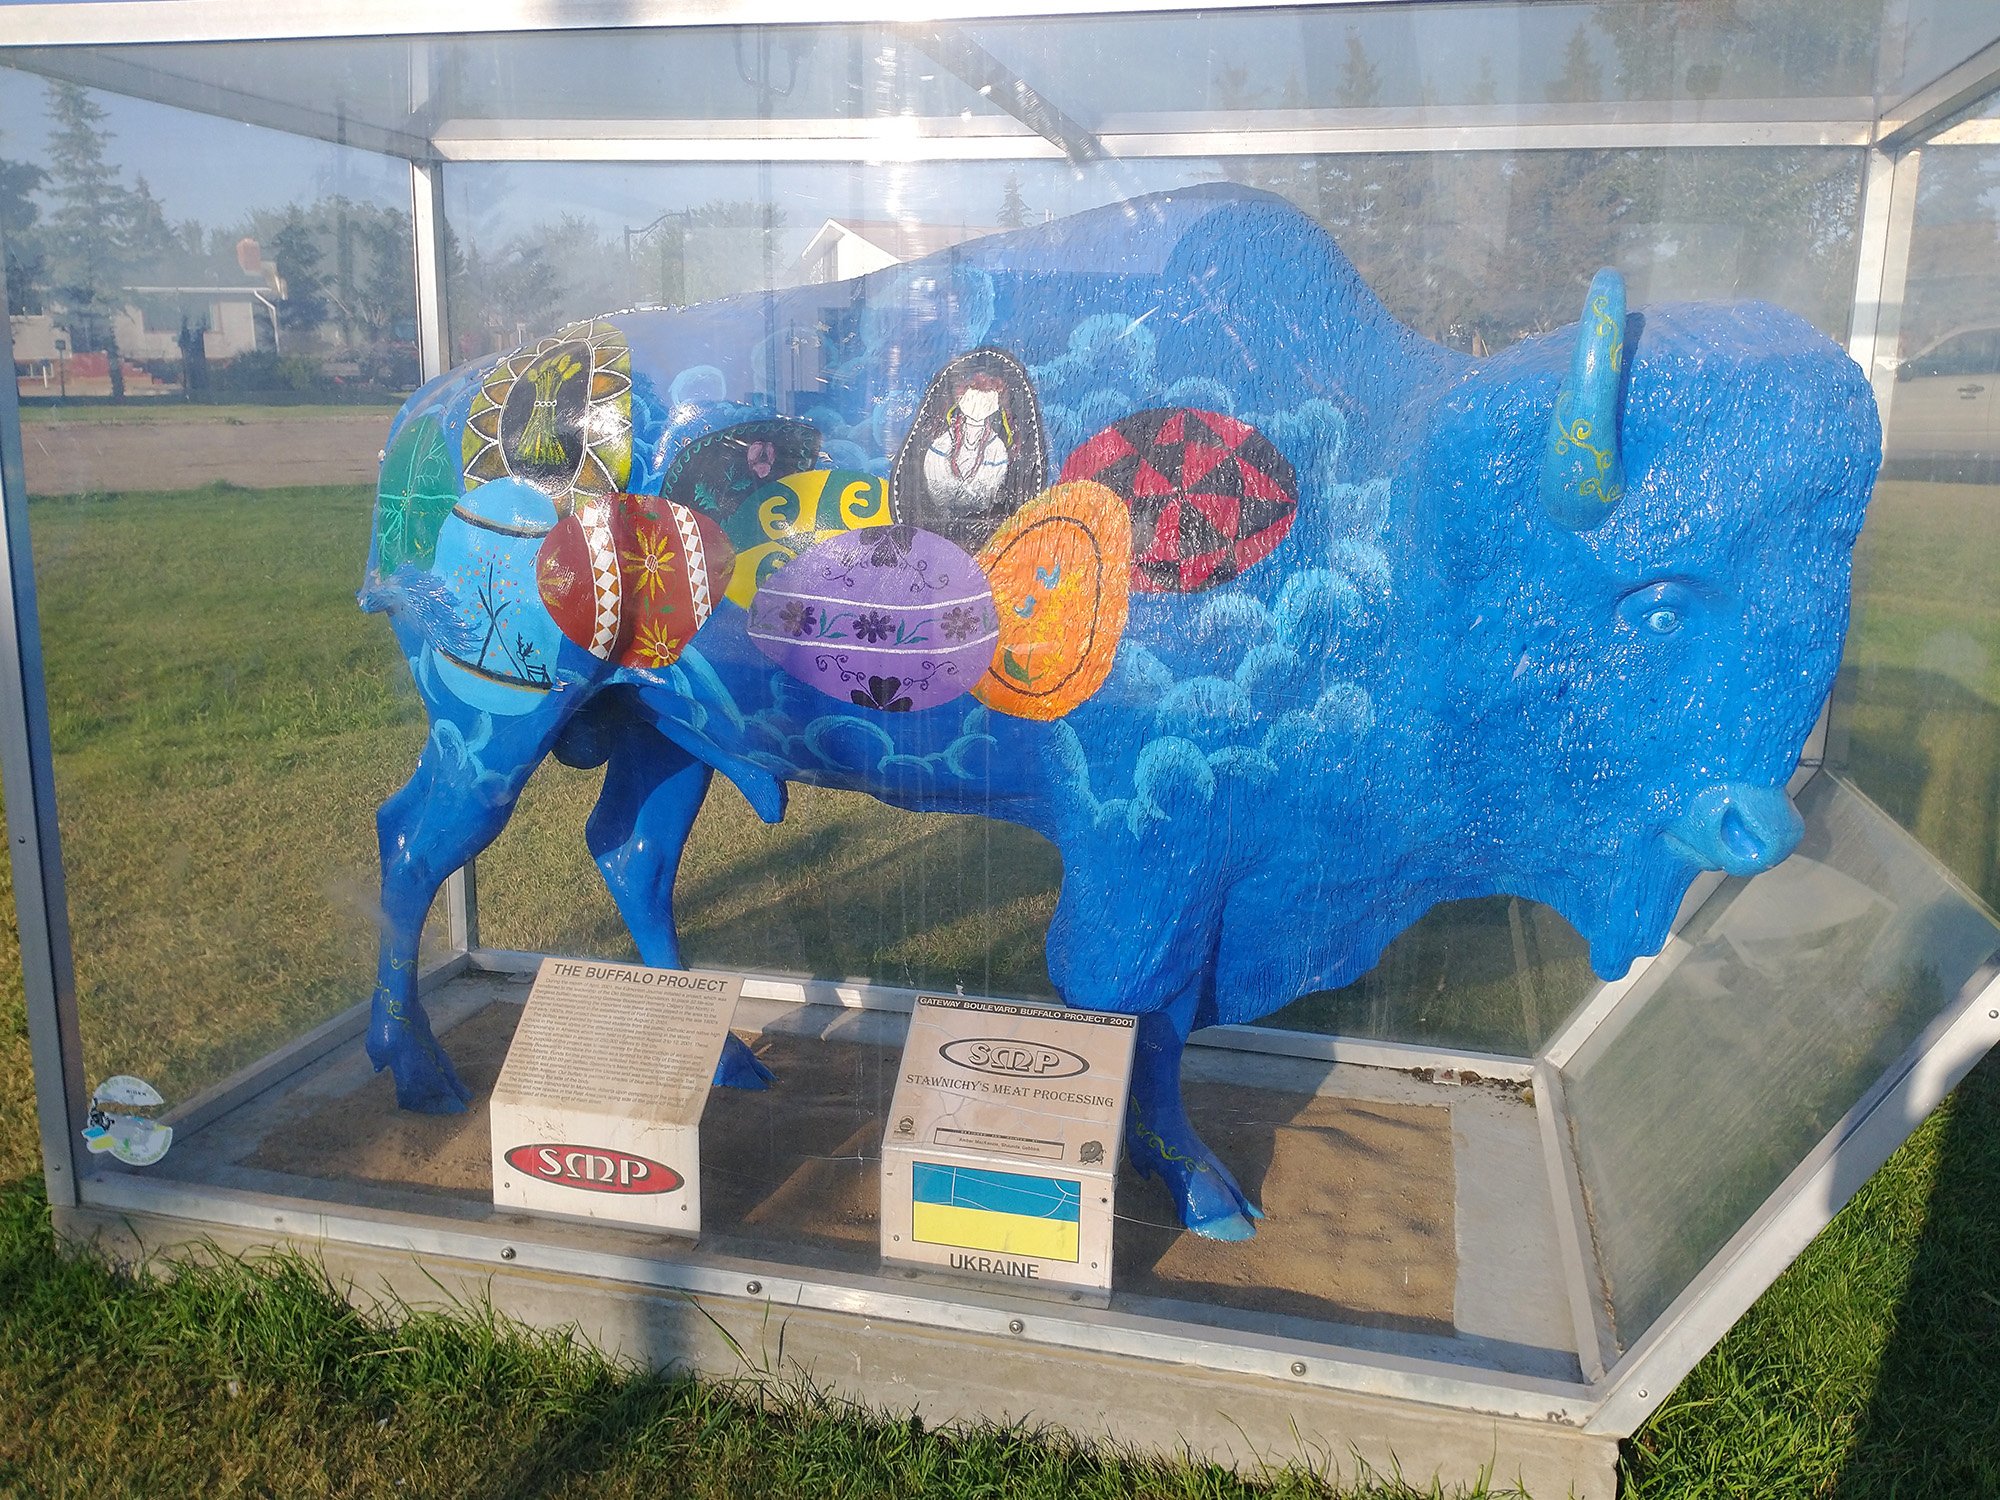 Also this blue bison that some students painted on. Where else were they going to put it but next to the sausage?